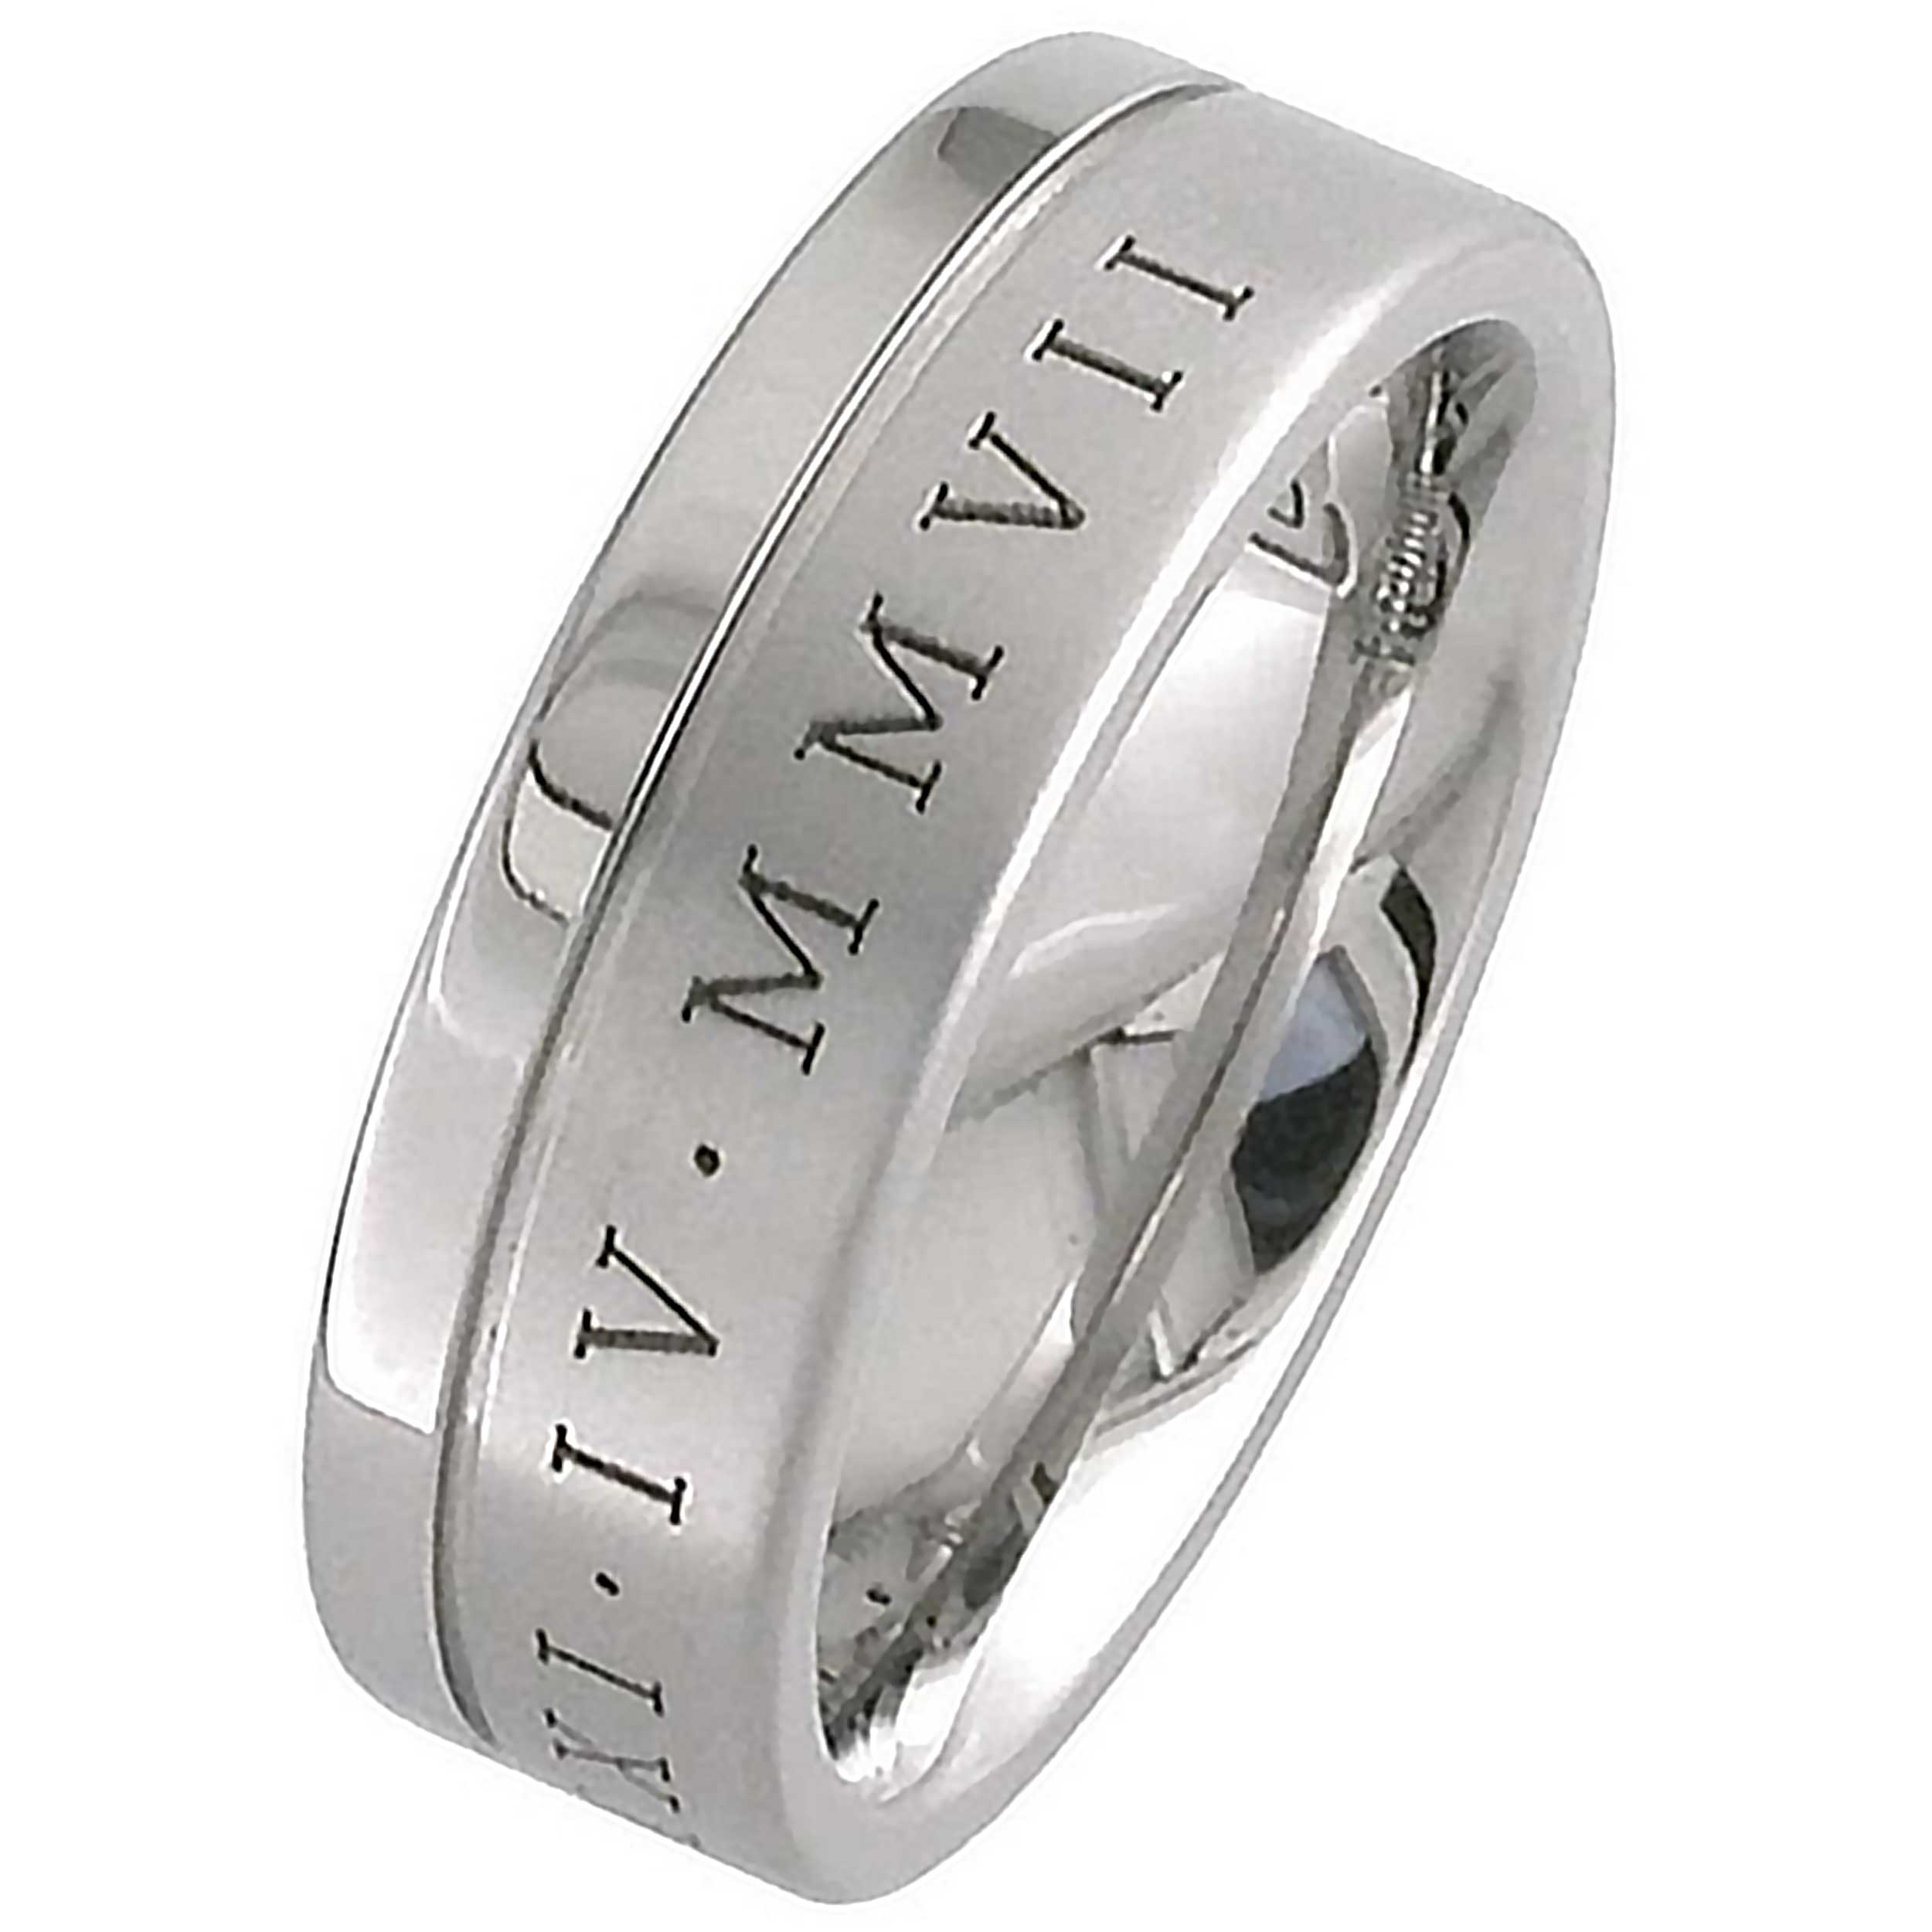 Personalized Engraved Tungsten Abalone and Hawaiian Opal Men's Wedding Band  Ring | eBay